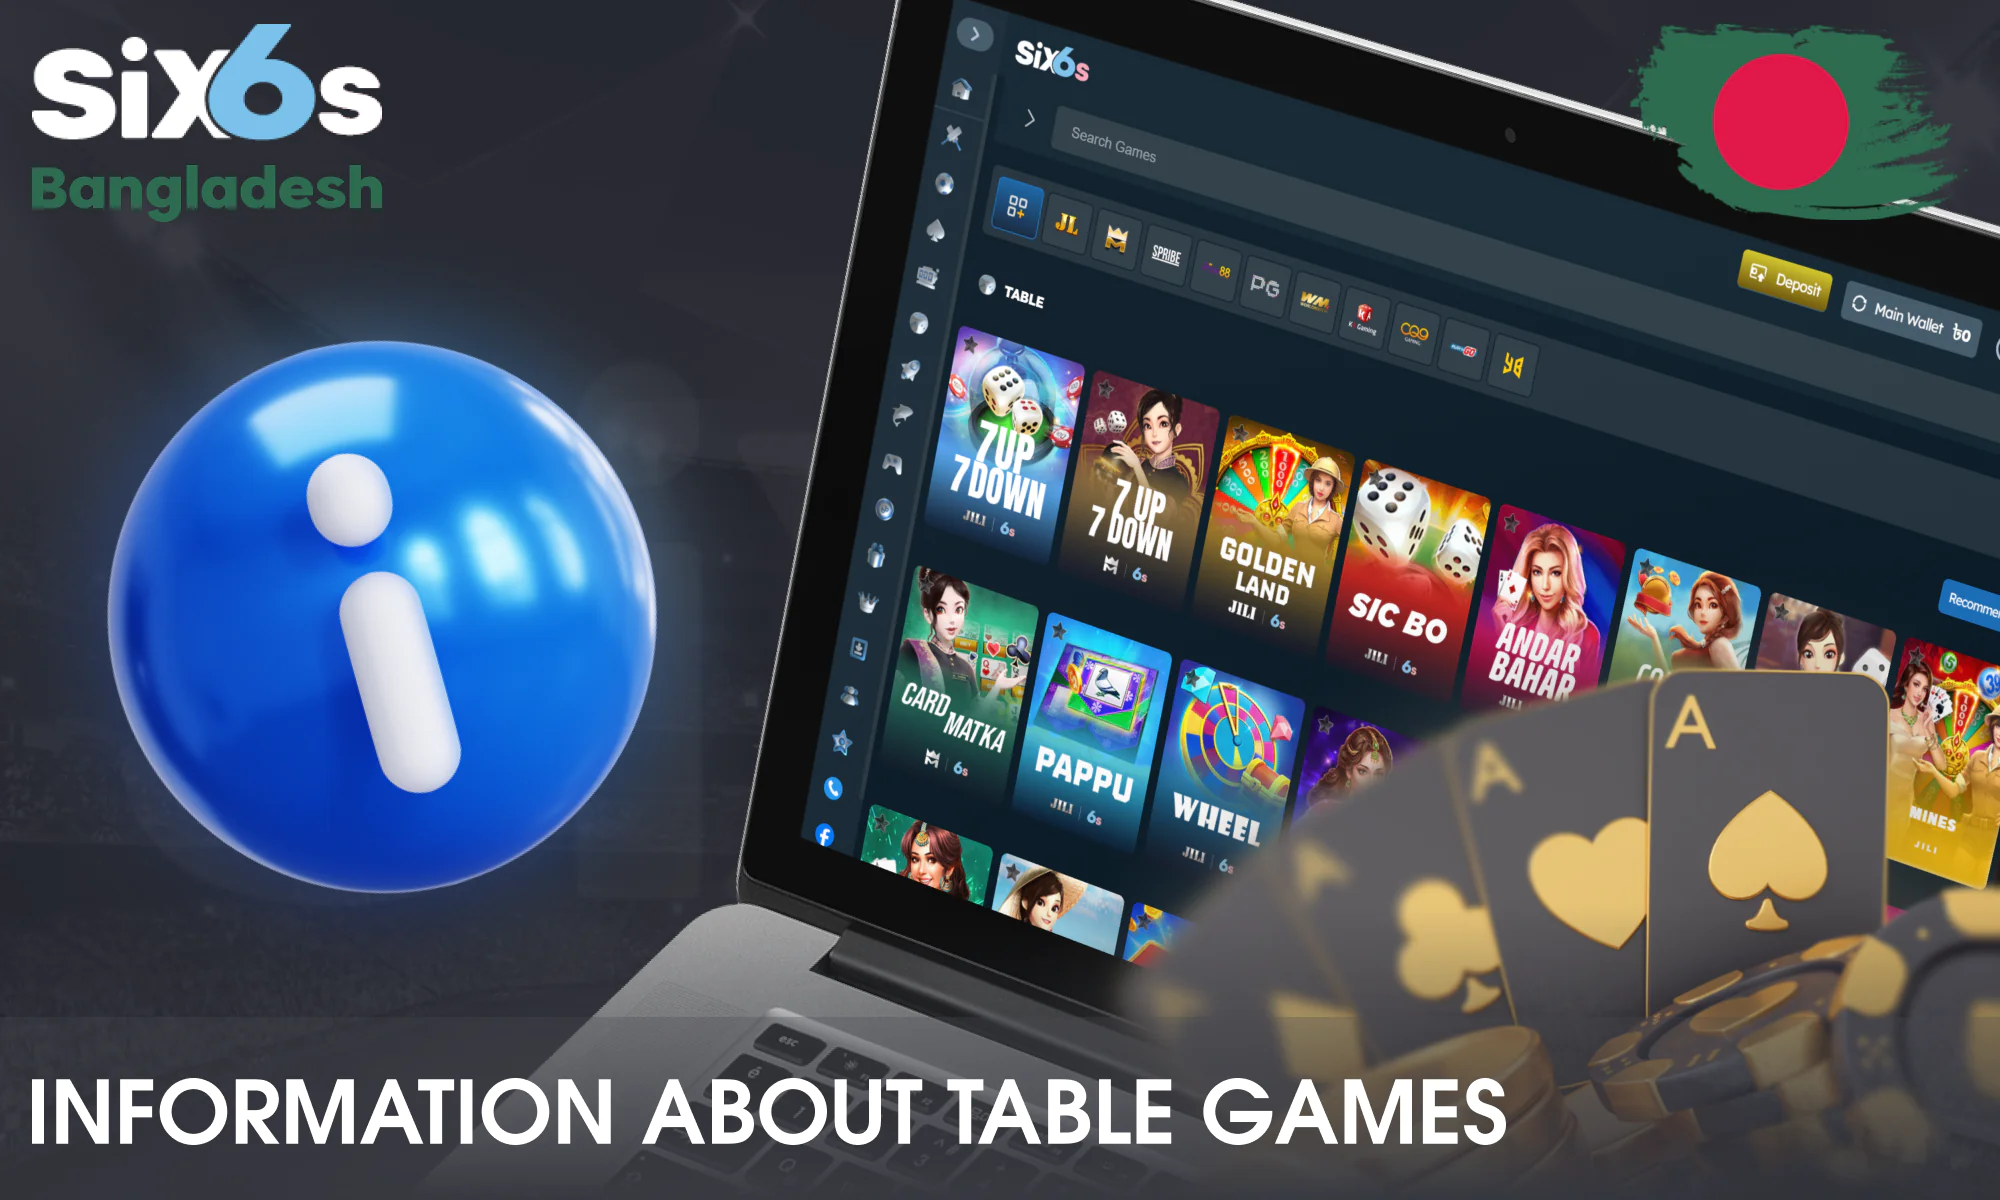 Brief Information about Table Games at Six6s Casino